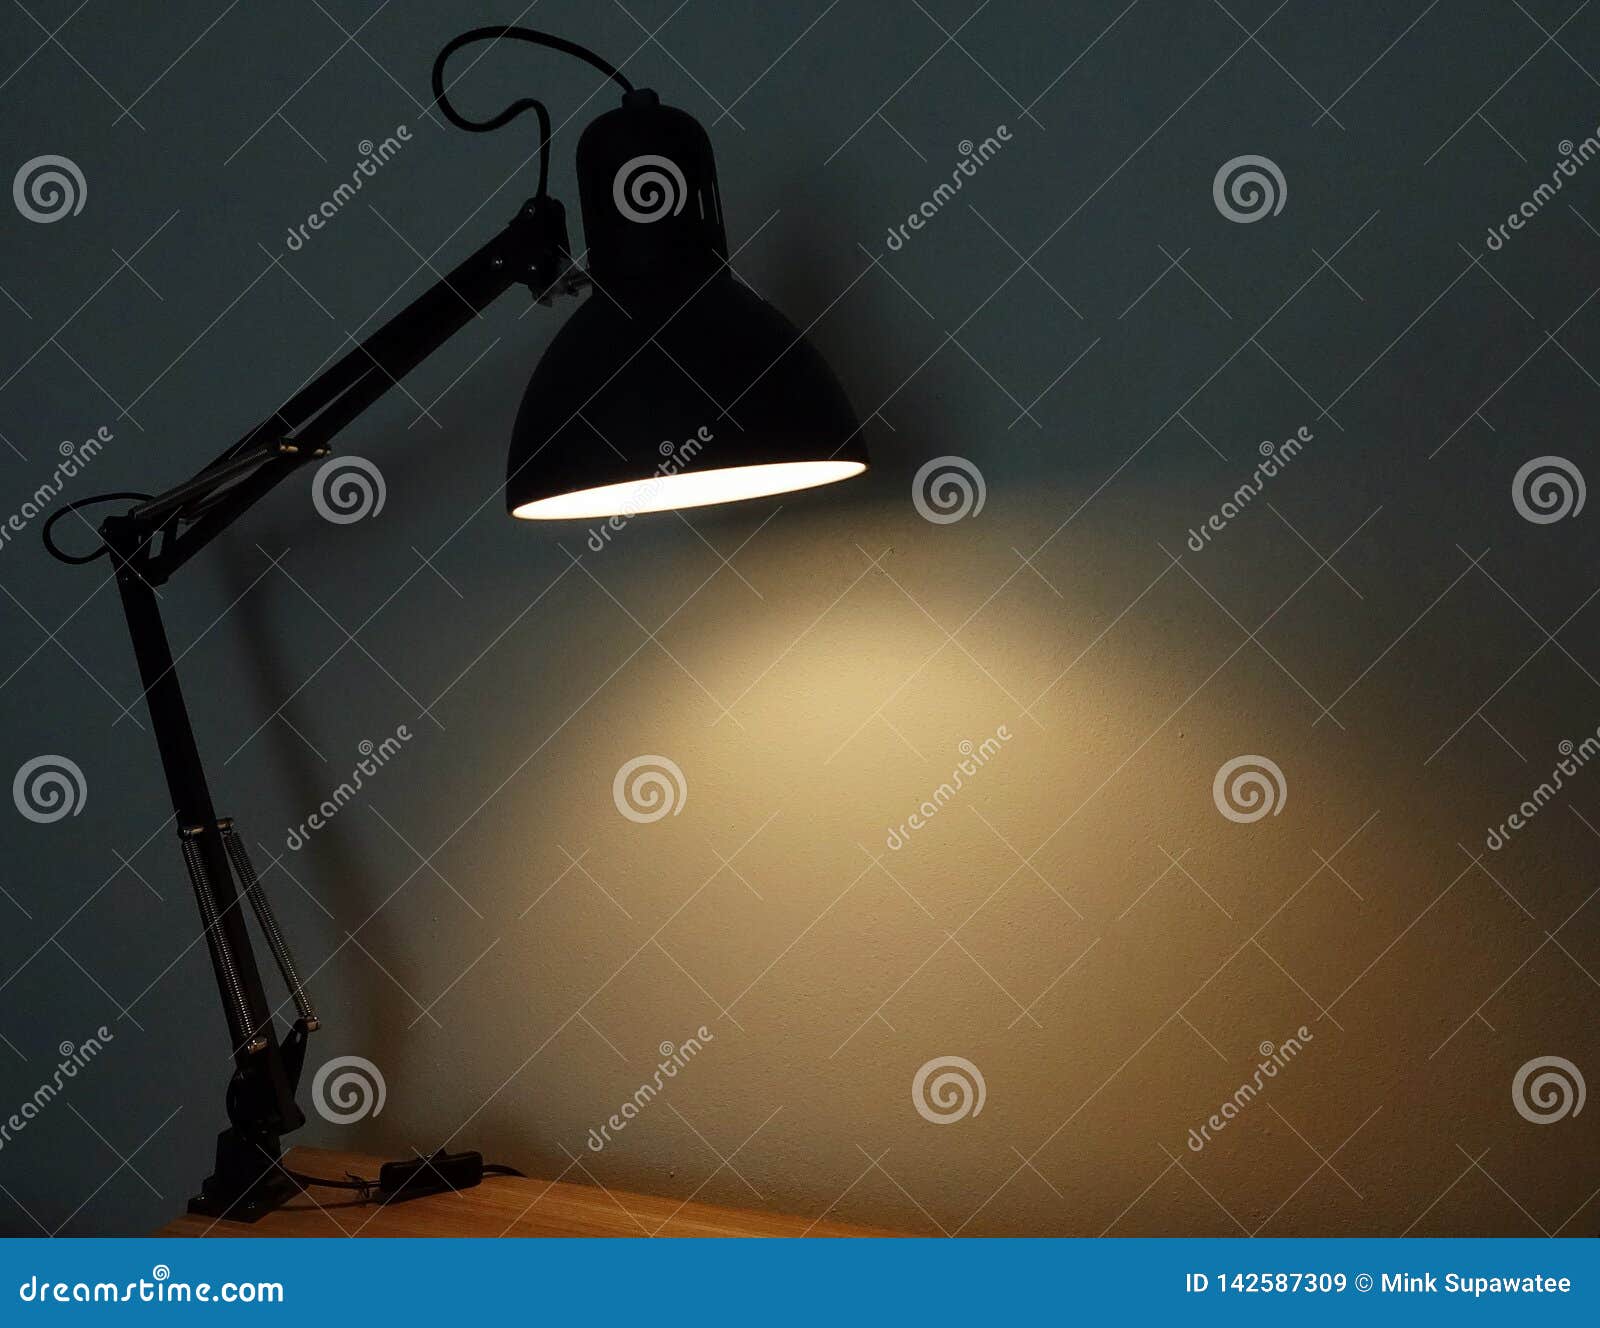 A Desk Lamp With The Light On Stock Image Image Of Office Room